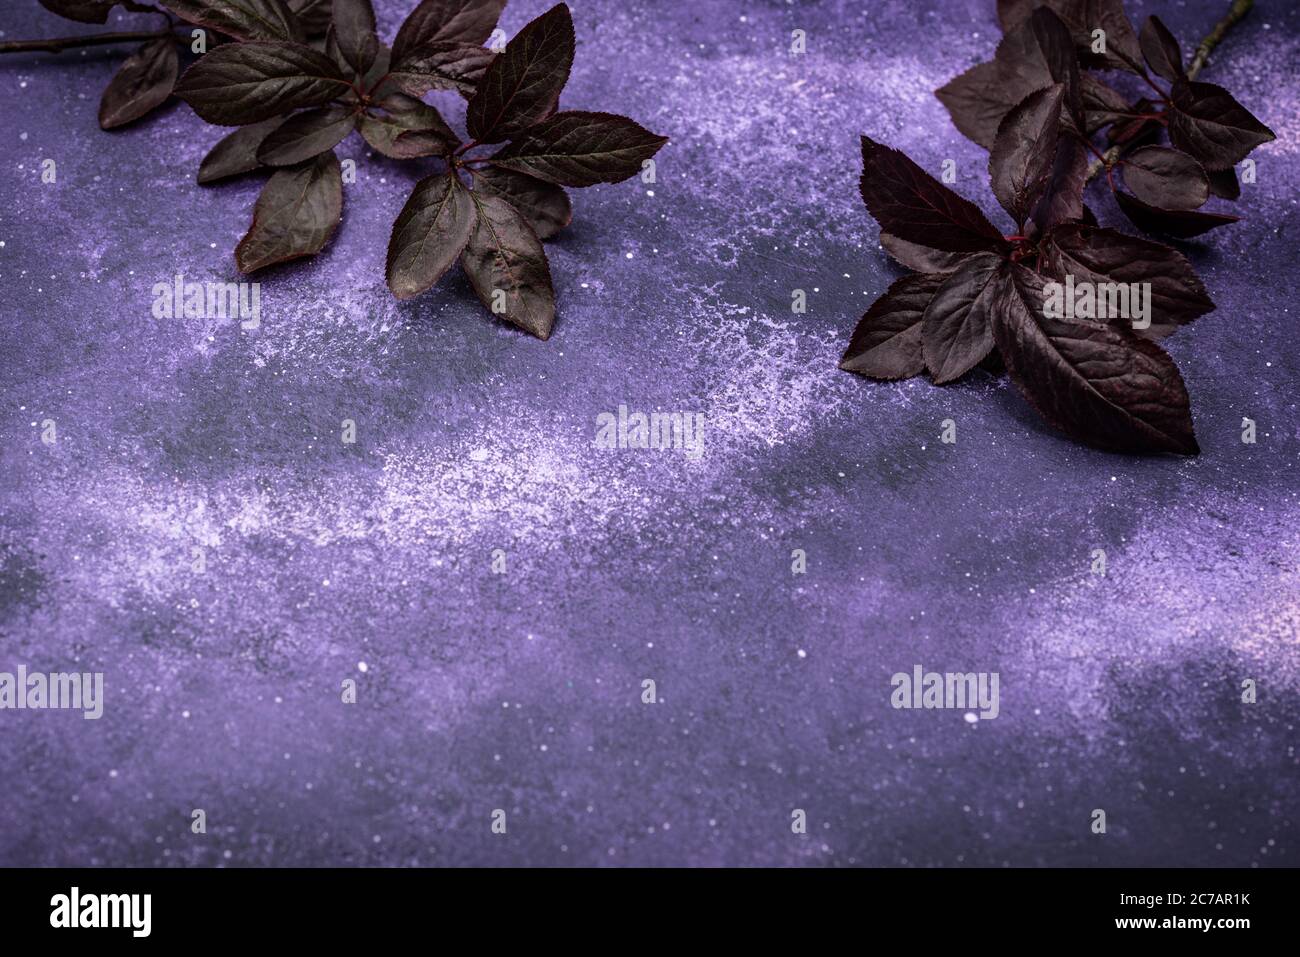 Purple violet cosmic background with dark leaves Stock Photo